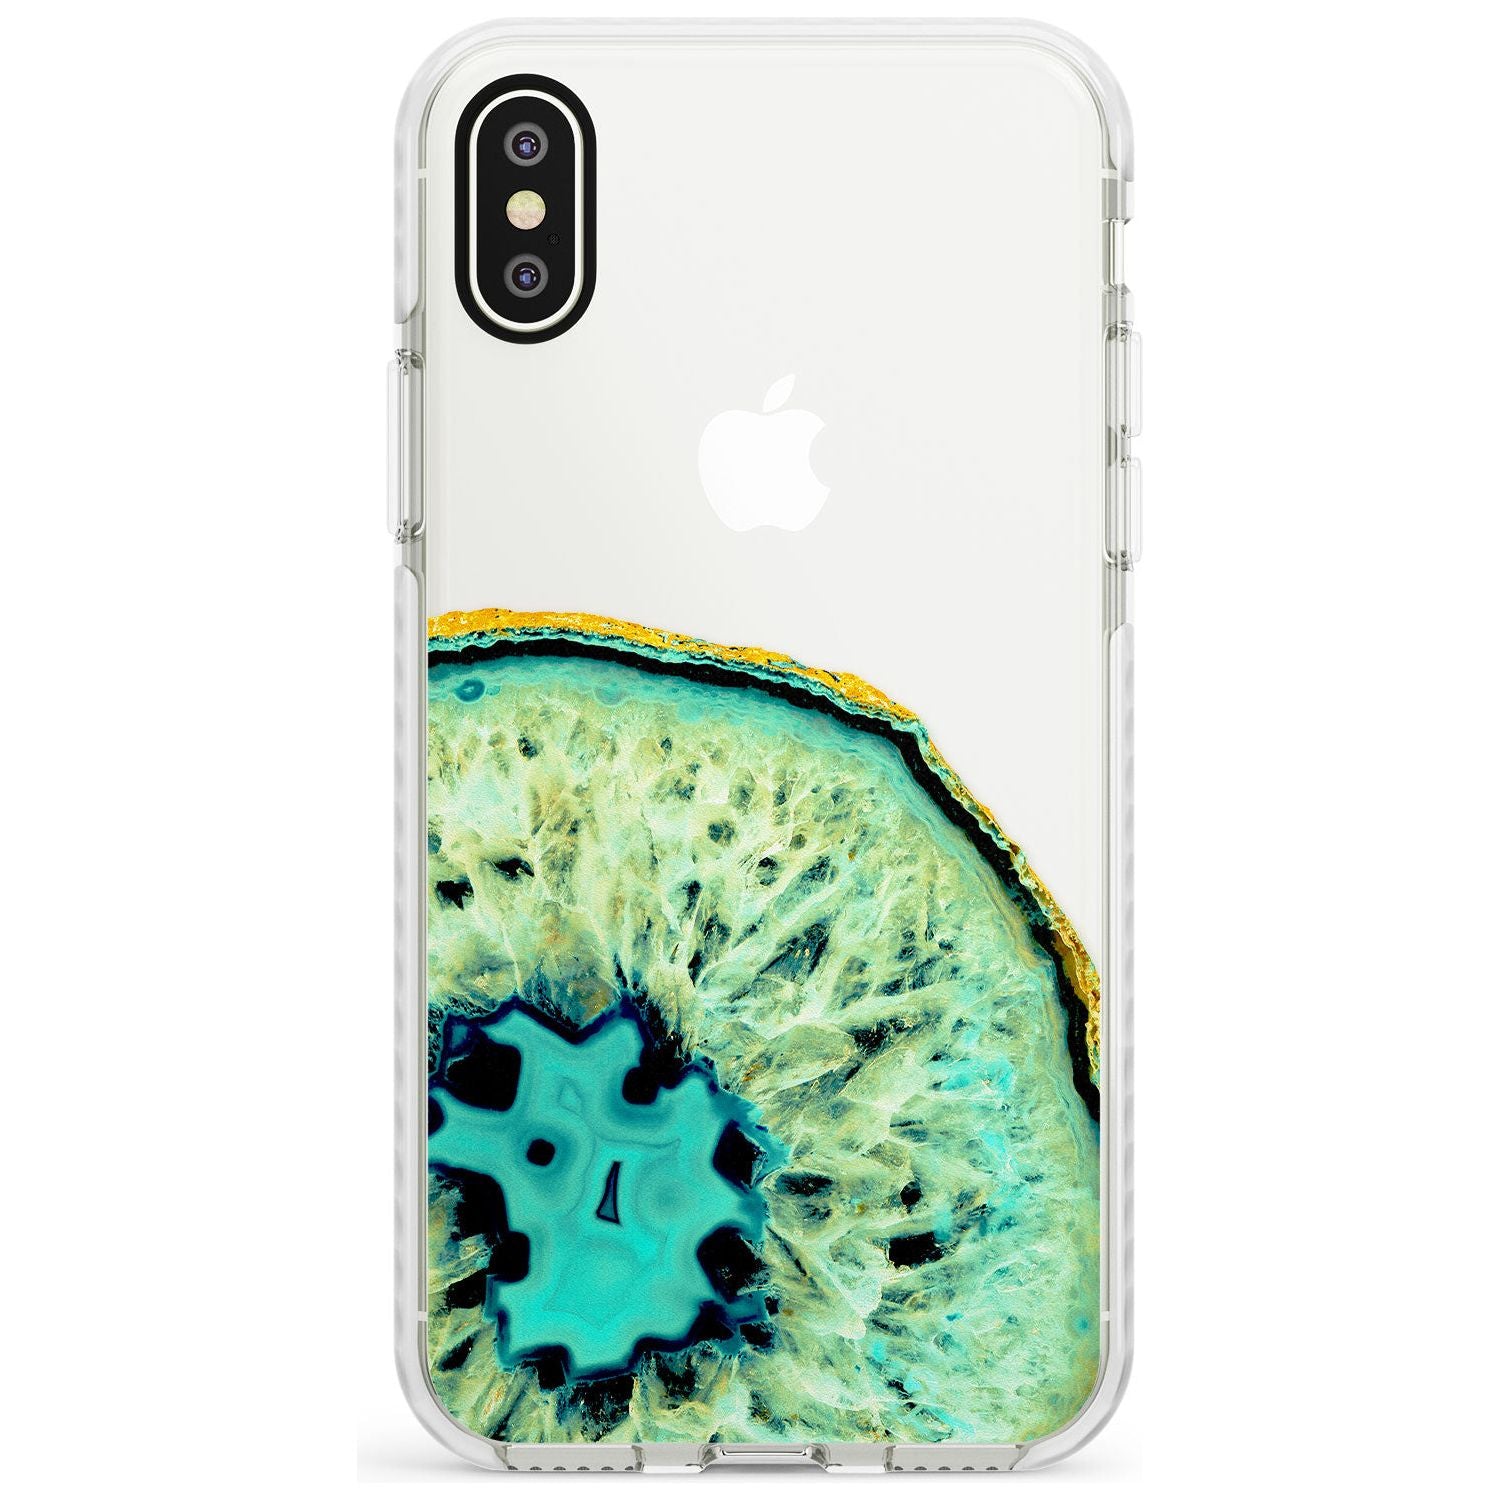 Turquoise & Green Gemstone Crystal Clear Design Impact Phone Case for iPhone X XS Max XR